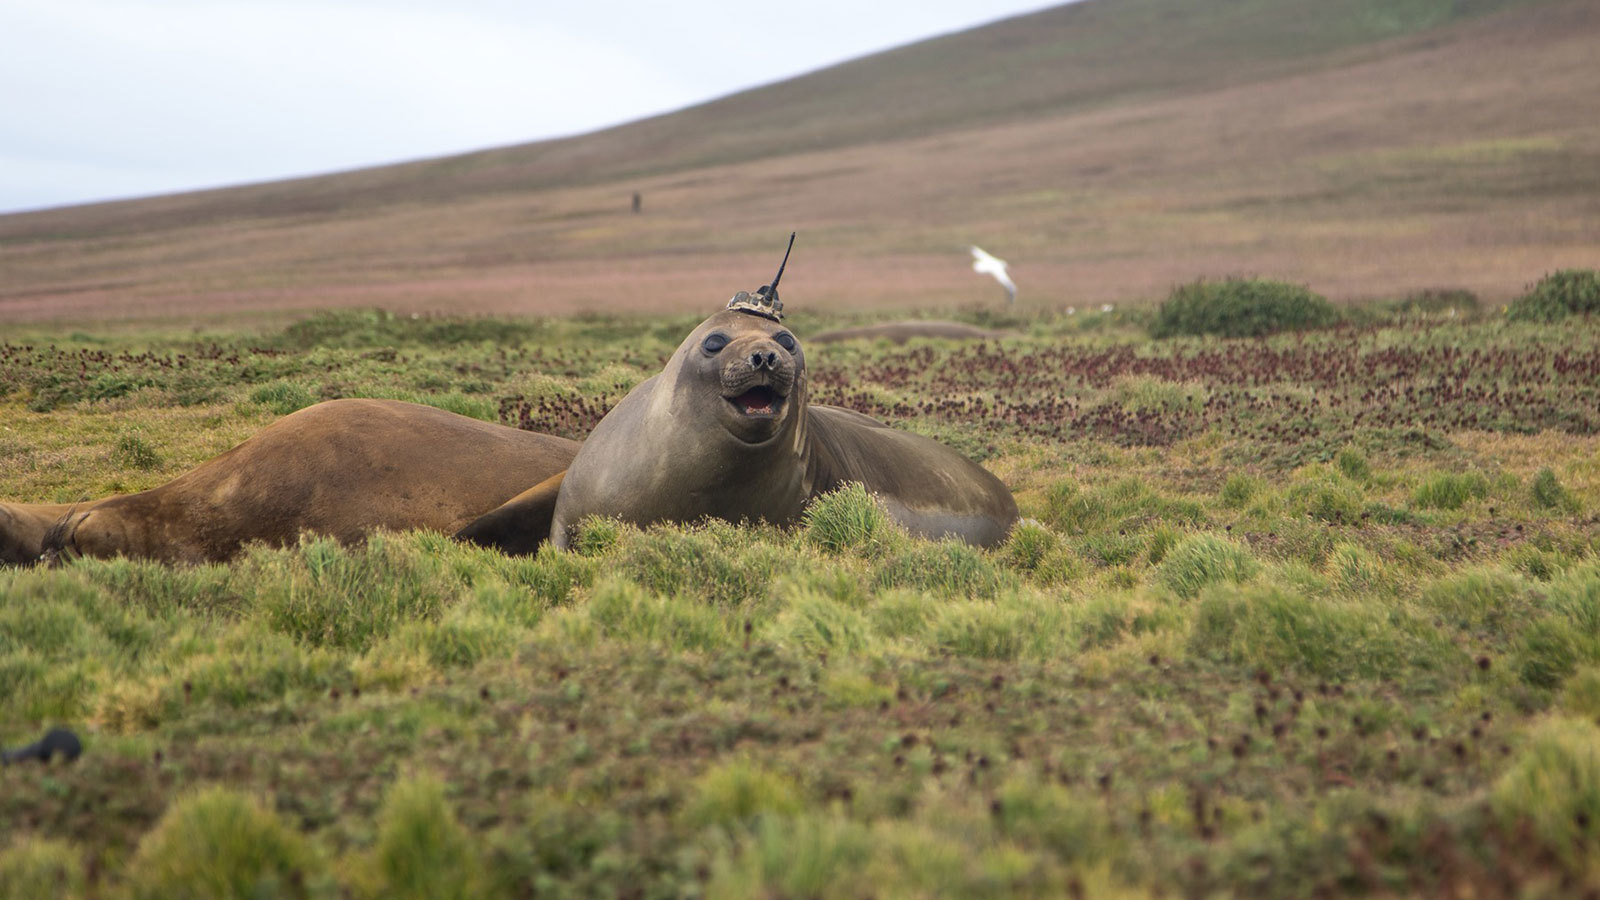 A tagged elephant seal basks on Kerguelen Island, a French territory in the Antarctic. Elephant seals are tagged as part of a French research program called SO-MEMO (Observing System - Mammals as Samplers of the Ocean Environment), operated by the French National Center for Scientific Research (CNRS). The tags - actually, sensors with antennas - are glued to the seals' heads in accordance with established ethical standards when the animals come ashore either to breed or to molt. The researchers remove the tags to retrieve their data when the seals return to land. If they miss a tag, it drops off with the dead skin in the next molting season. Credit: Sorbonne University/Etienne Pauthenet › Larger view